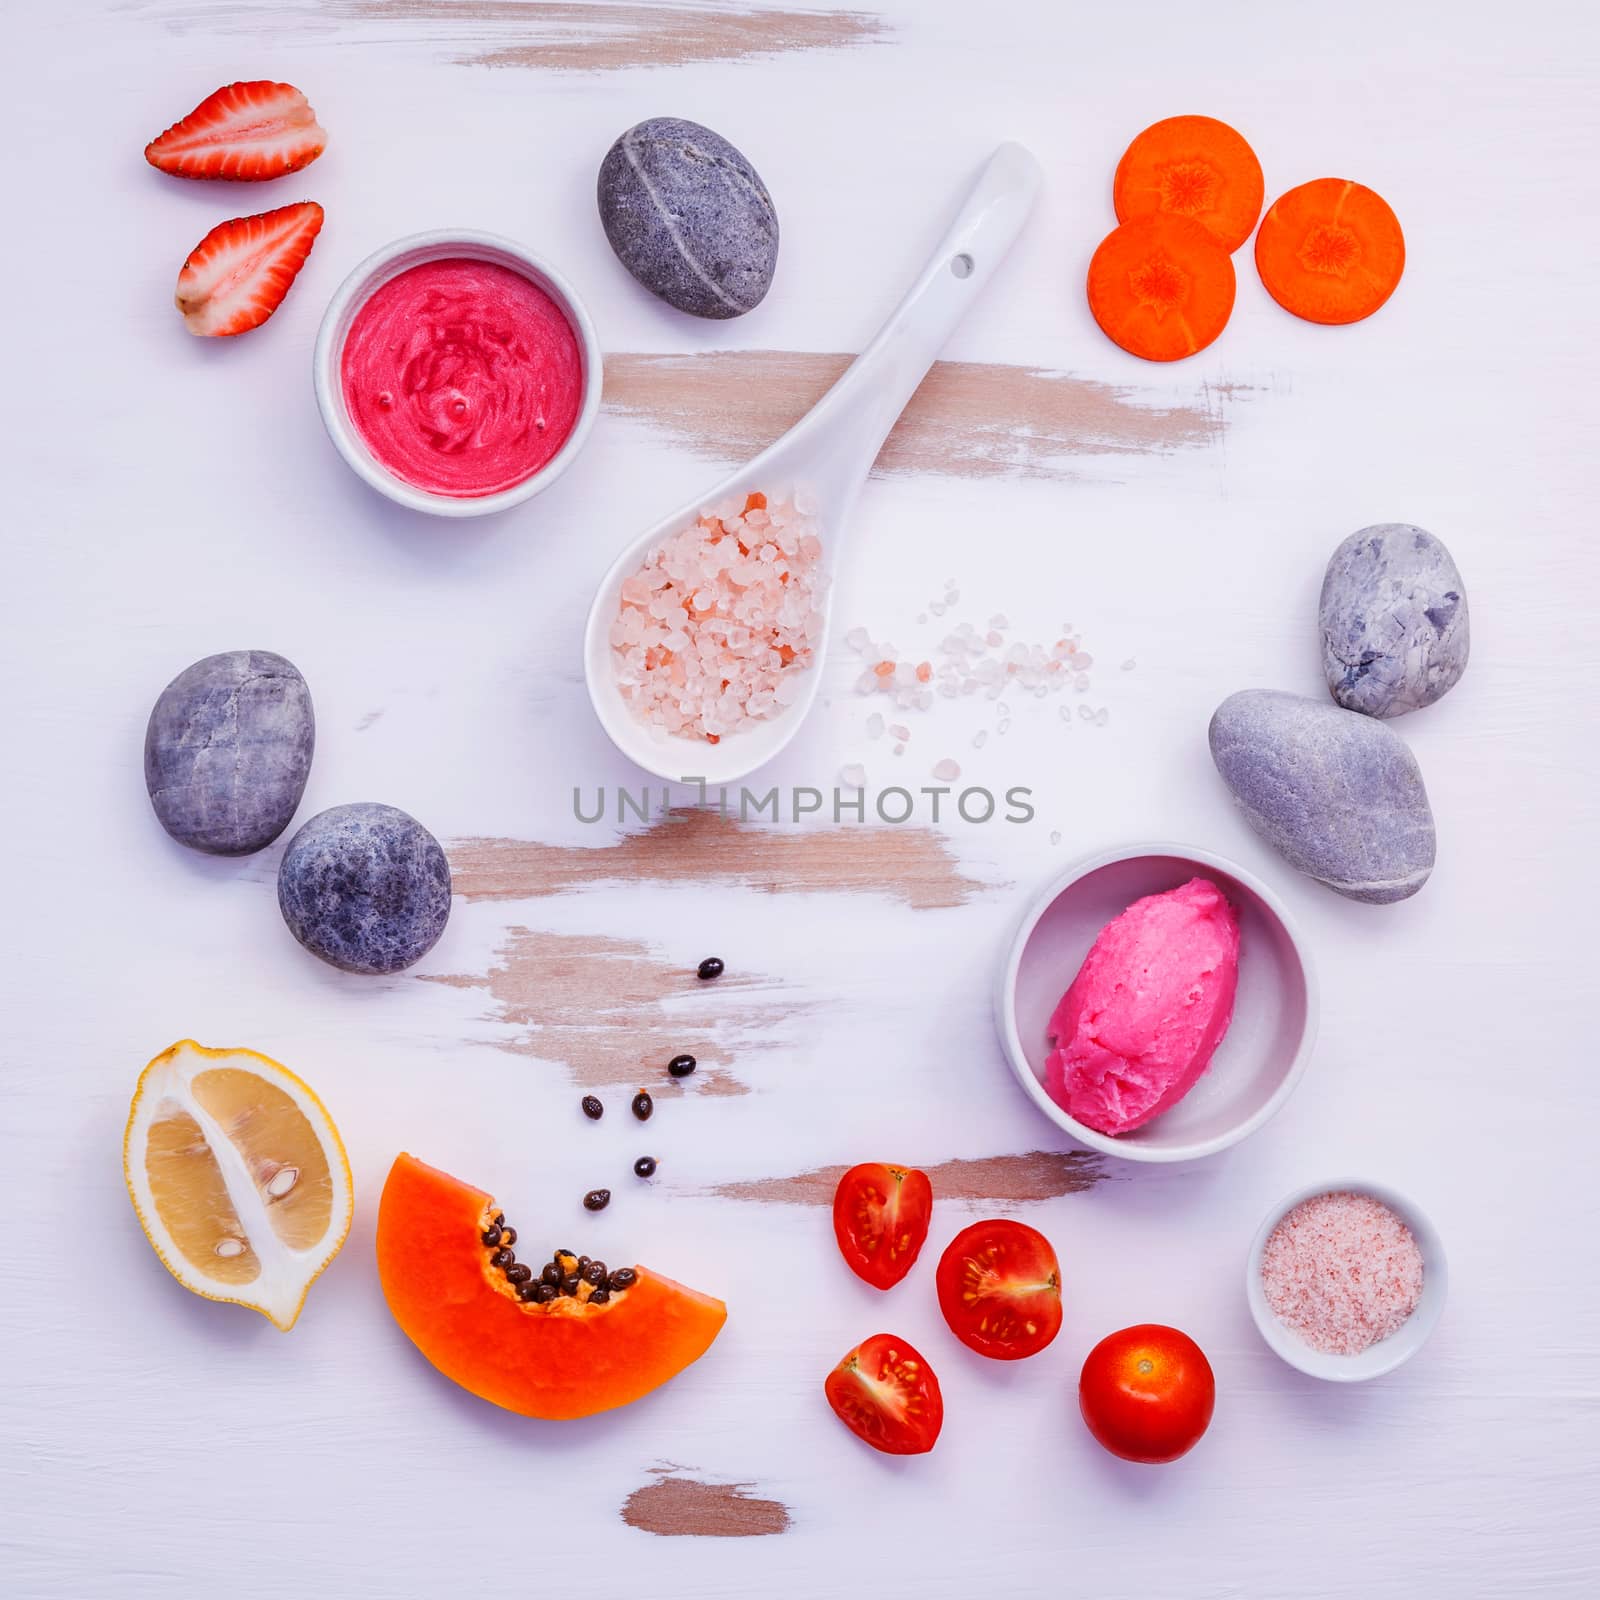 Homemade skin care and body scrubs with red natural ingredients strawberry ,tomato ,himalayan salt, papaya, carrot and spa stone setup on white wooden background .Zen spa and oriental spa theme.